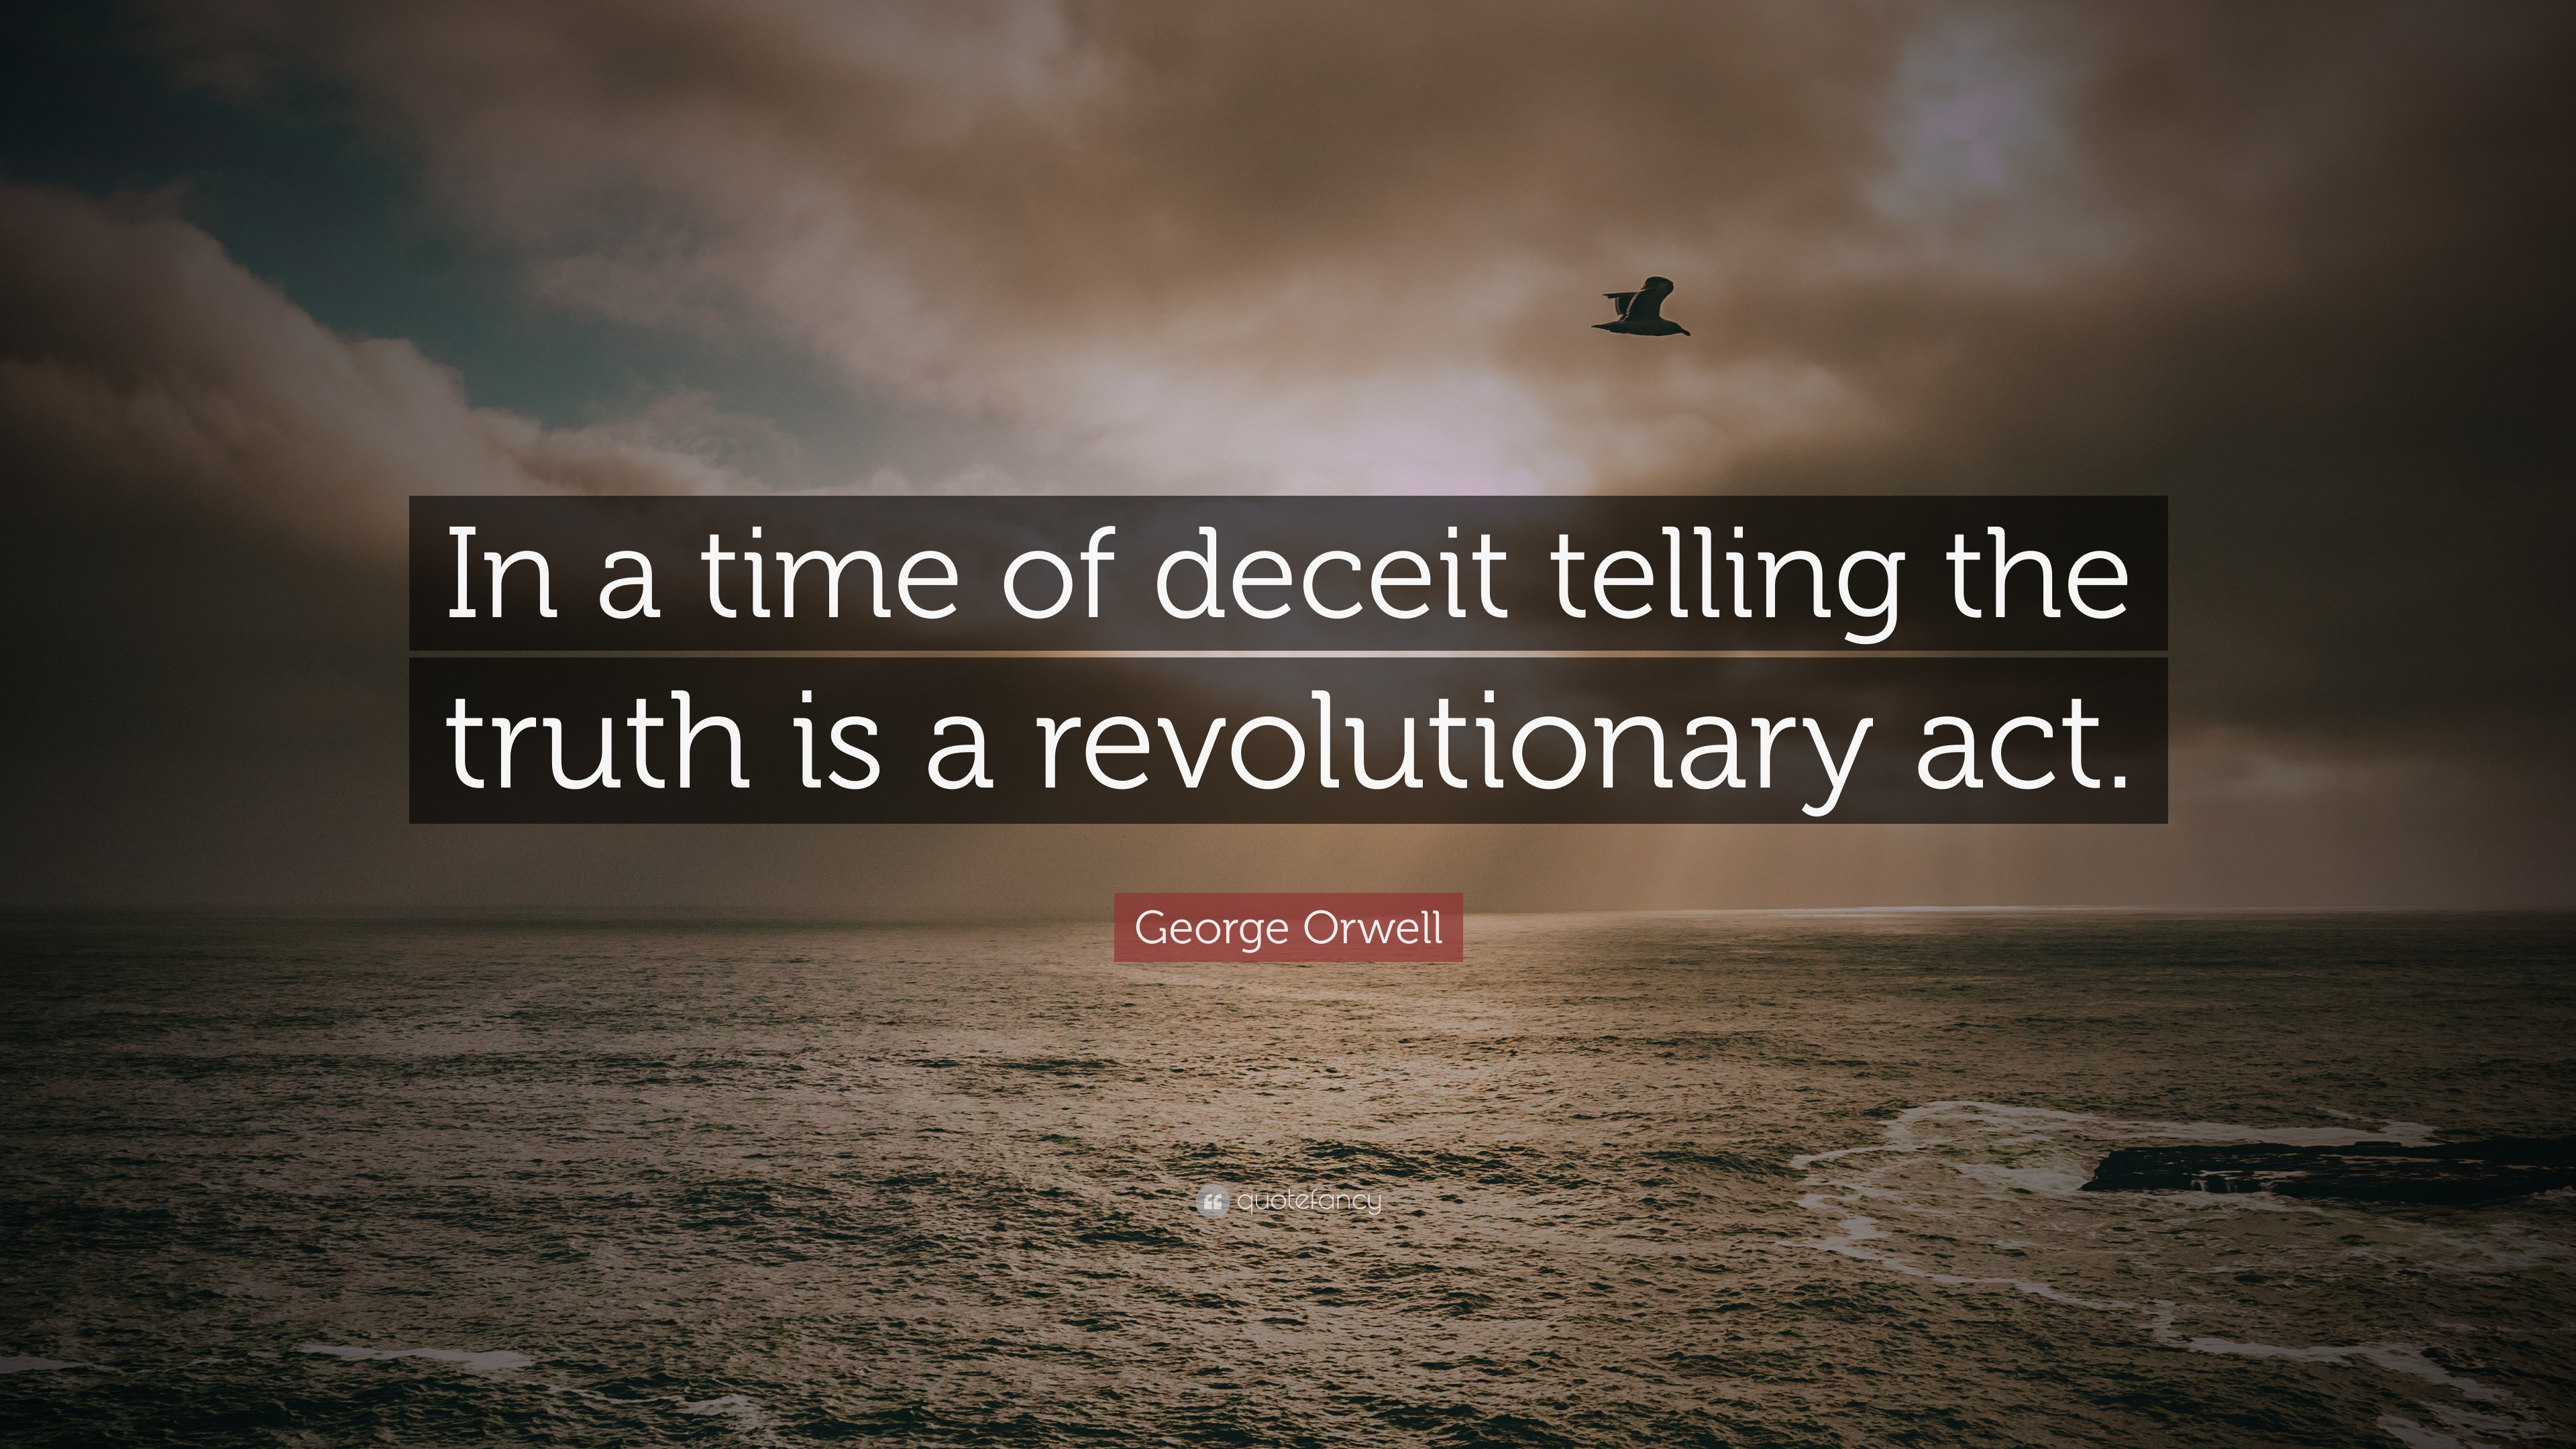 George Orwell Quote: "In a time of deceit telling the truth is a revol...